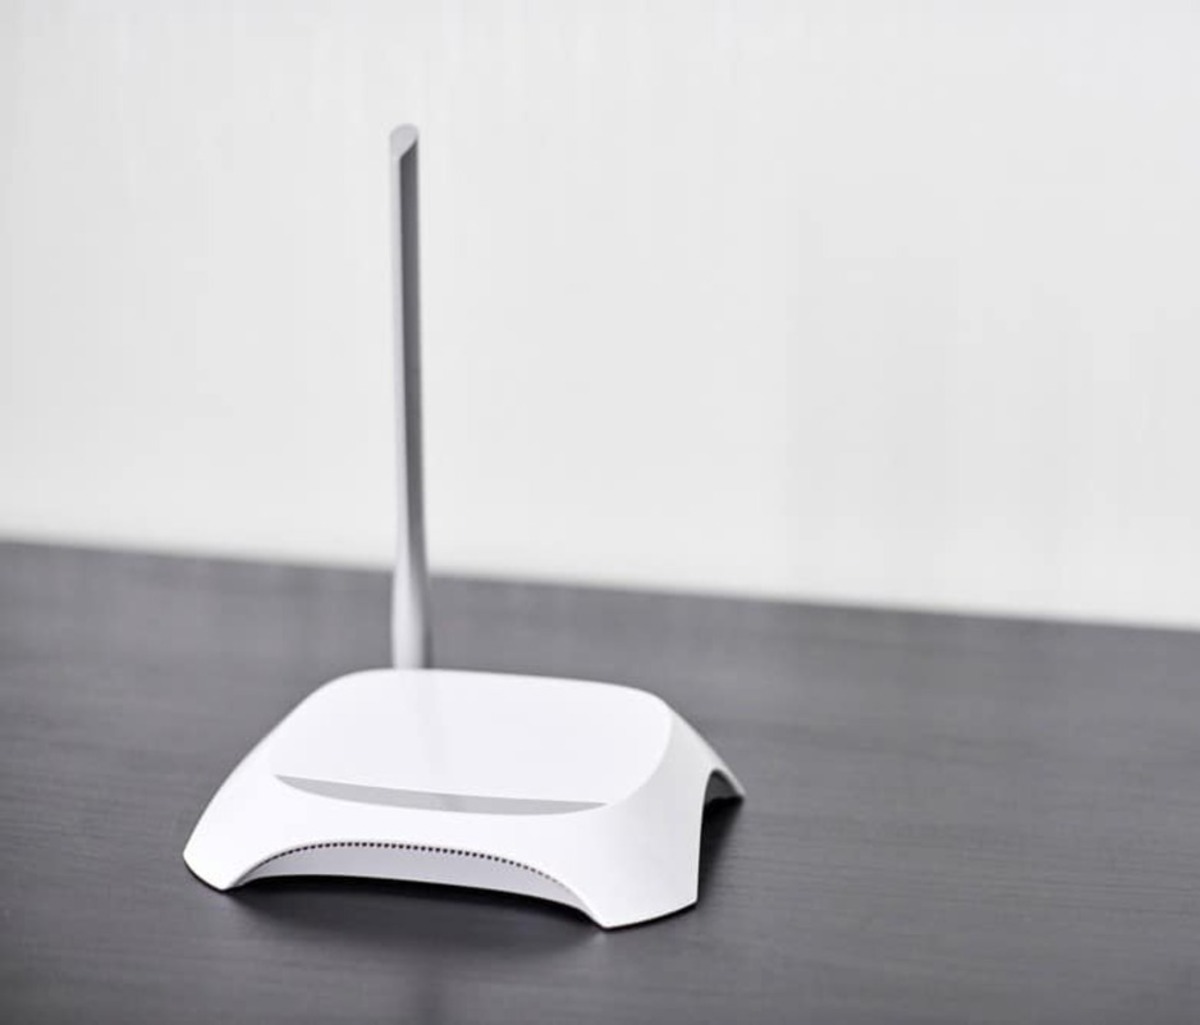 How To Turn A Router Into A Wifi Adapter